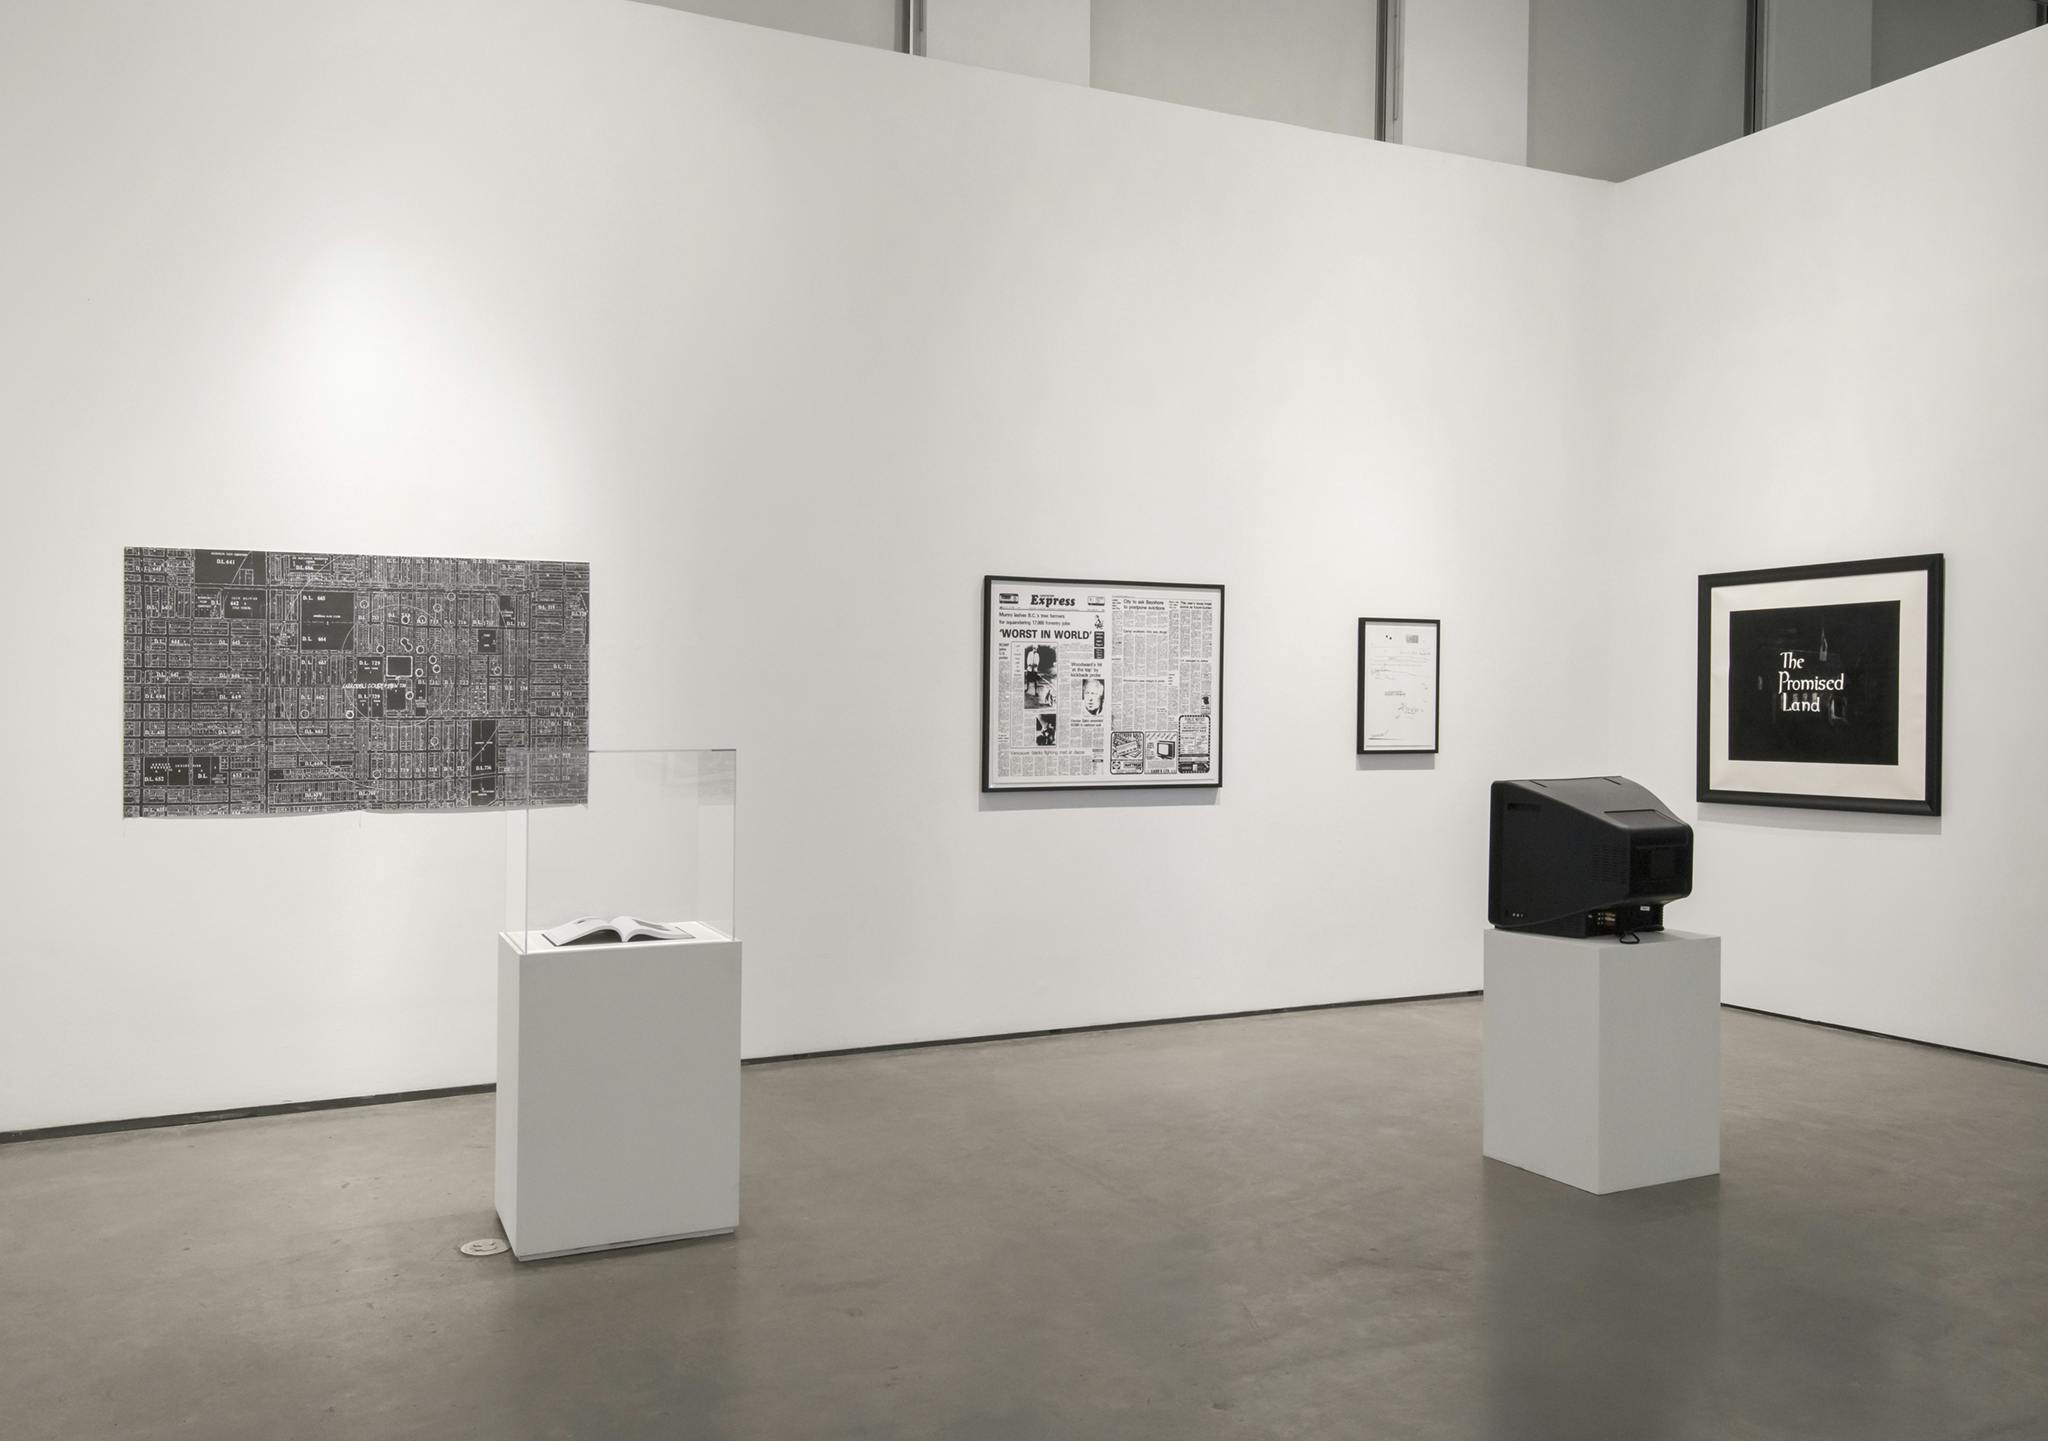 Multimedia works installed in a gallery: a TV monitor on a plinth, two framed prints, a framed print of a newspaper spread, a print of city subdivisions, a vitrine with an open book.